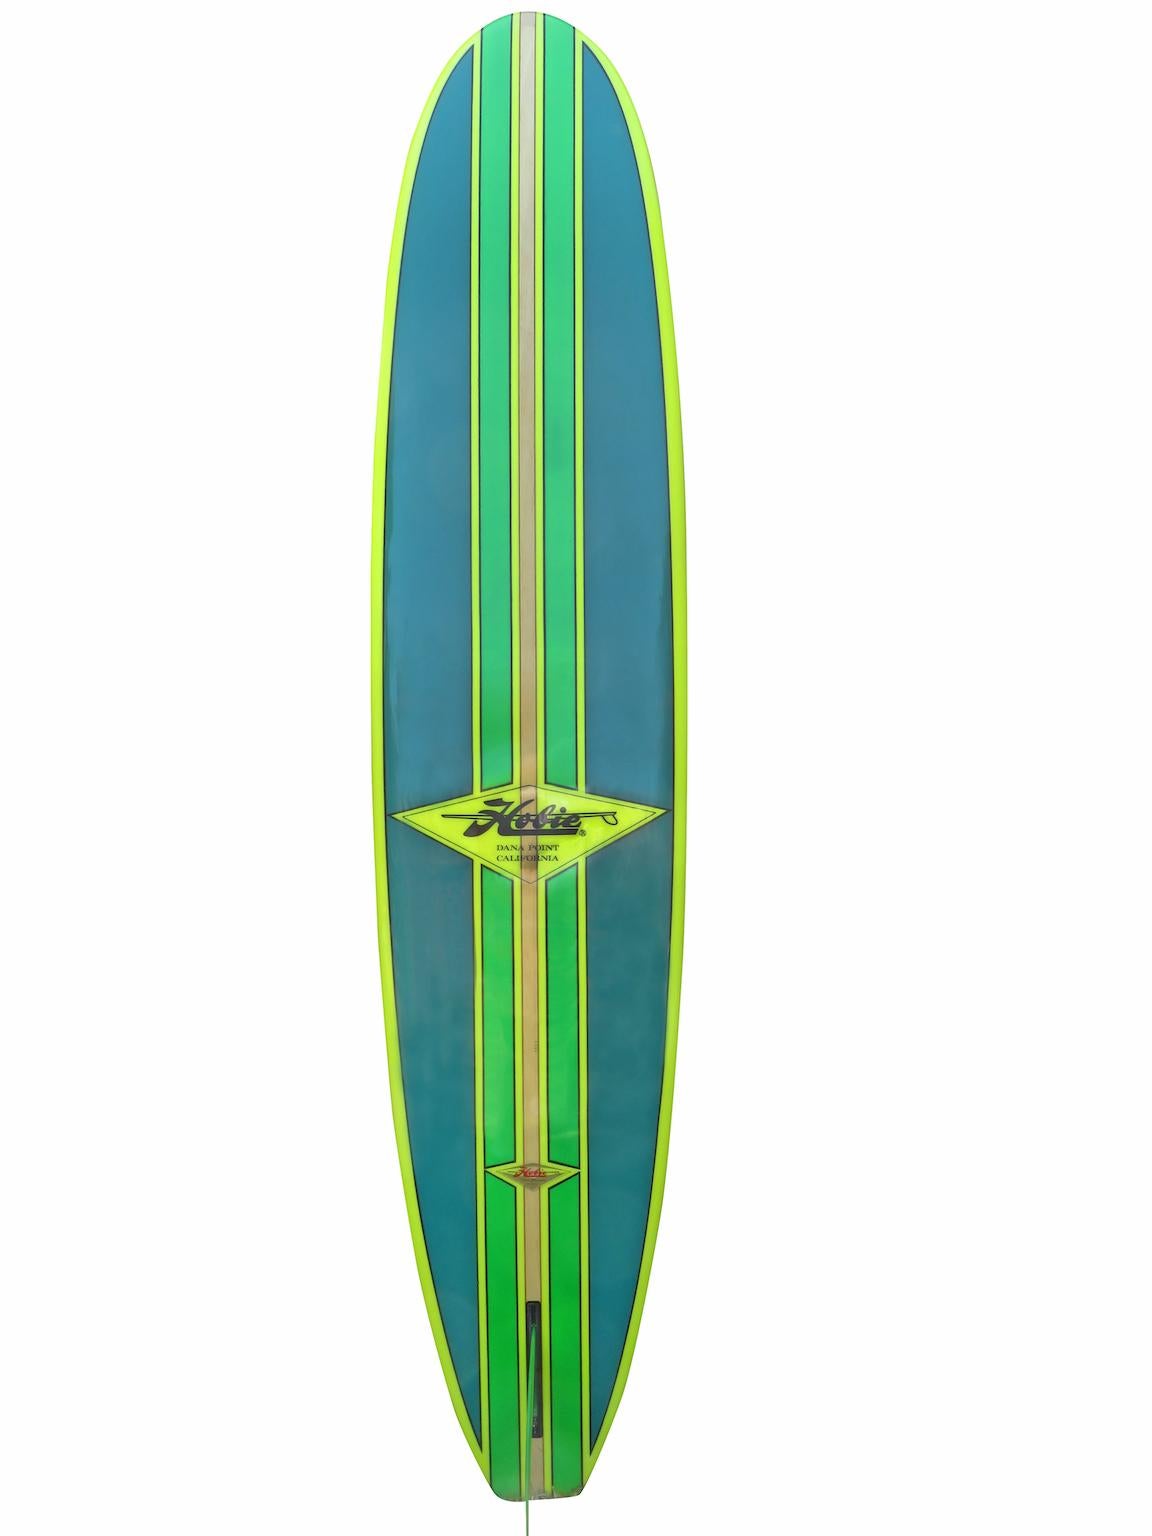 Mid-1990s vintage Hobie Phil Edwards model longboard surfboard shaped by Phil Edwards. Featuring a custom airbrush design with T-band stringer and box single fin. This surfboard is in great all original condition and has never been surfed!

Phil